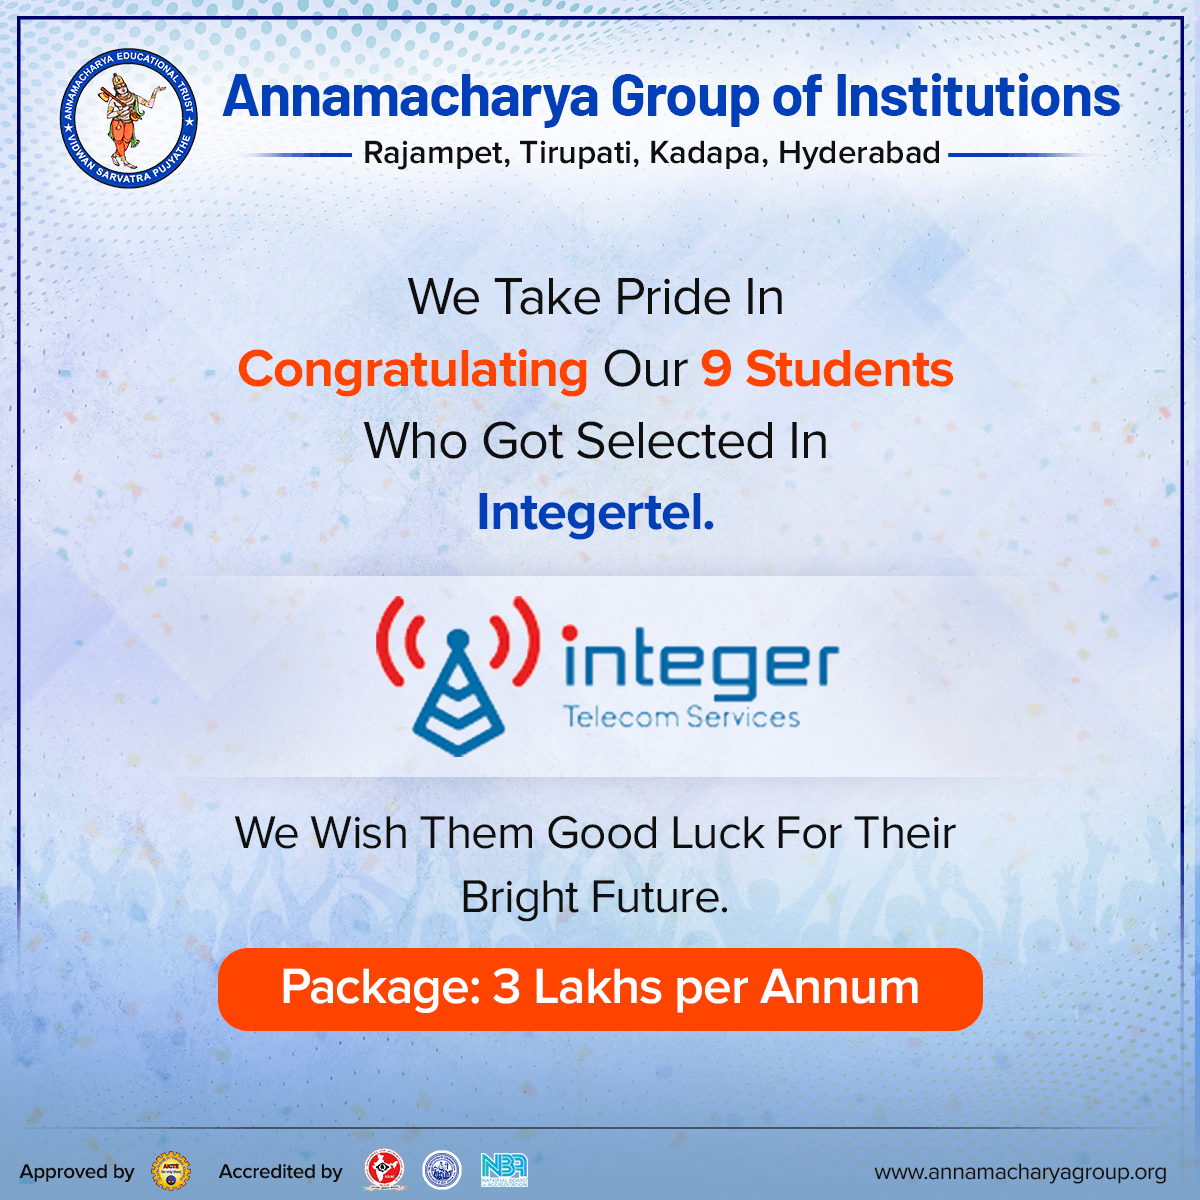 We Take Pride in Congratulating our 9 Students Who Got Selected in Integertel